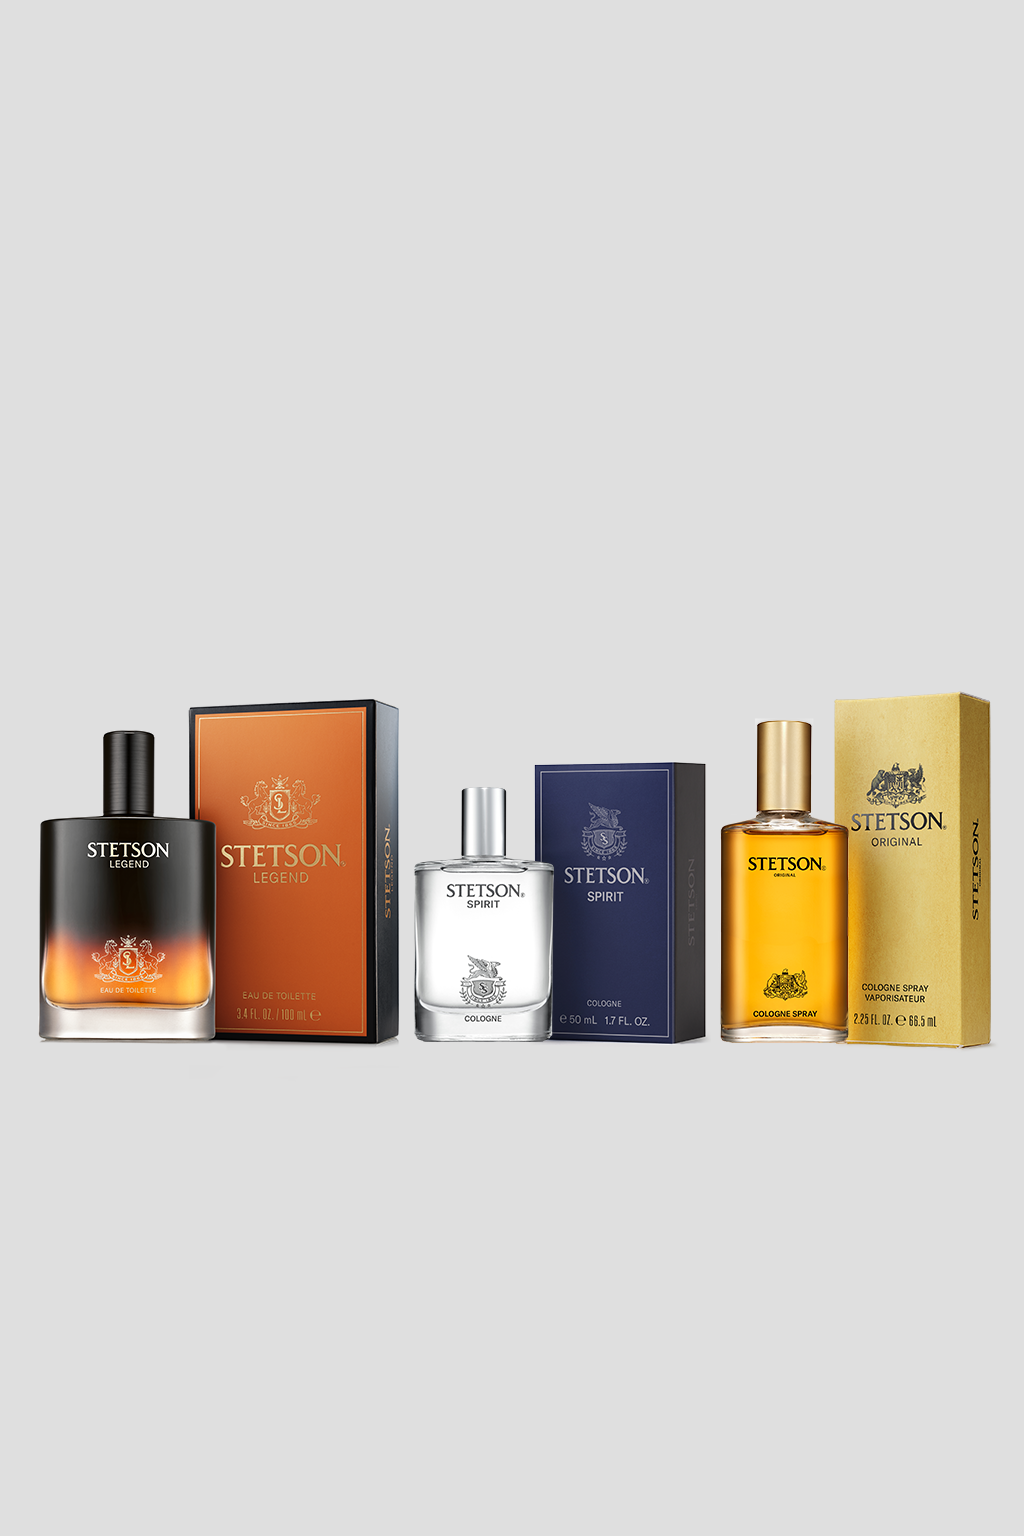 STETSON FRAGRANCE HOLIDAY COLLECTION